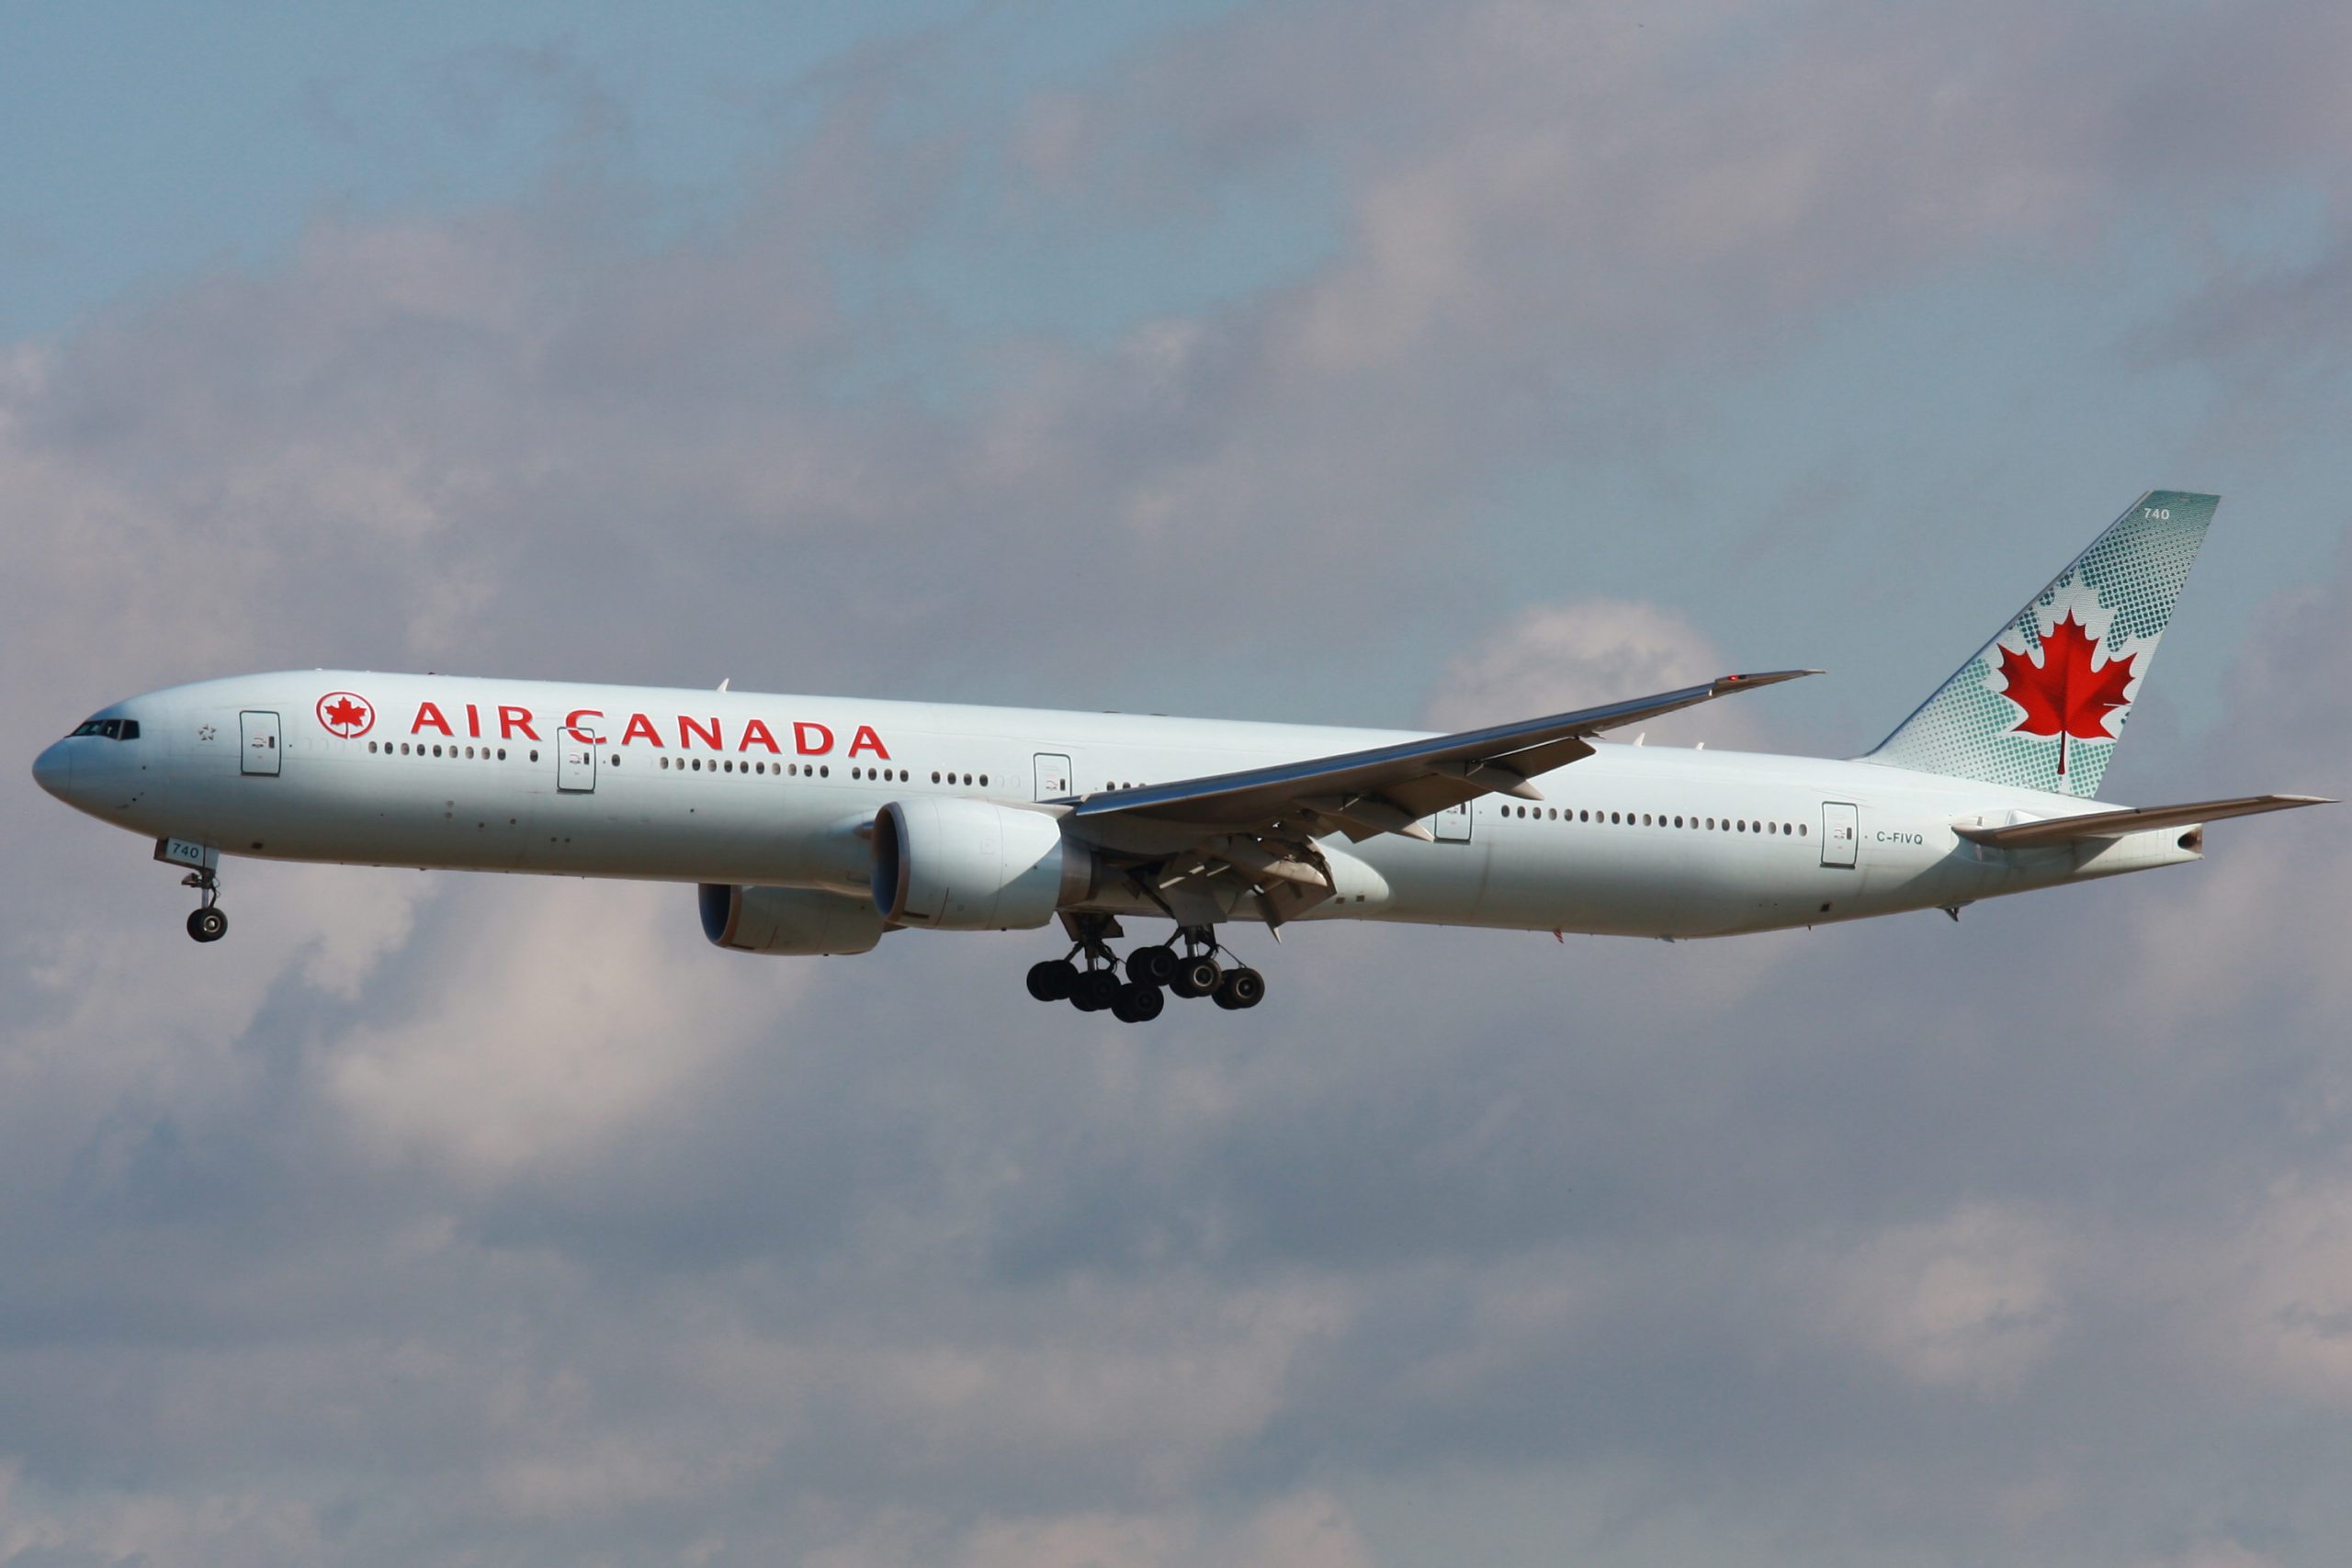 Air Canada: Parents Must Pay To Guarantee 2-year-old Can Sit With Them On Flight